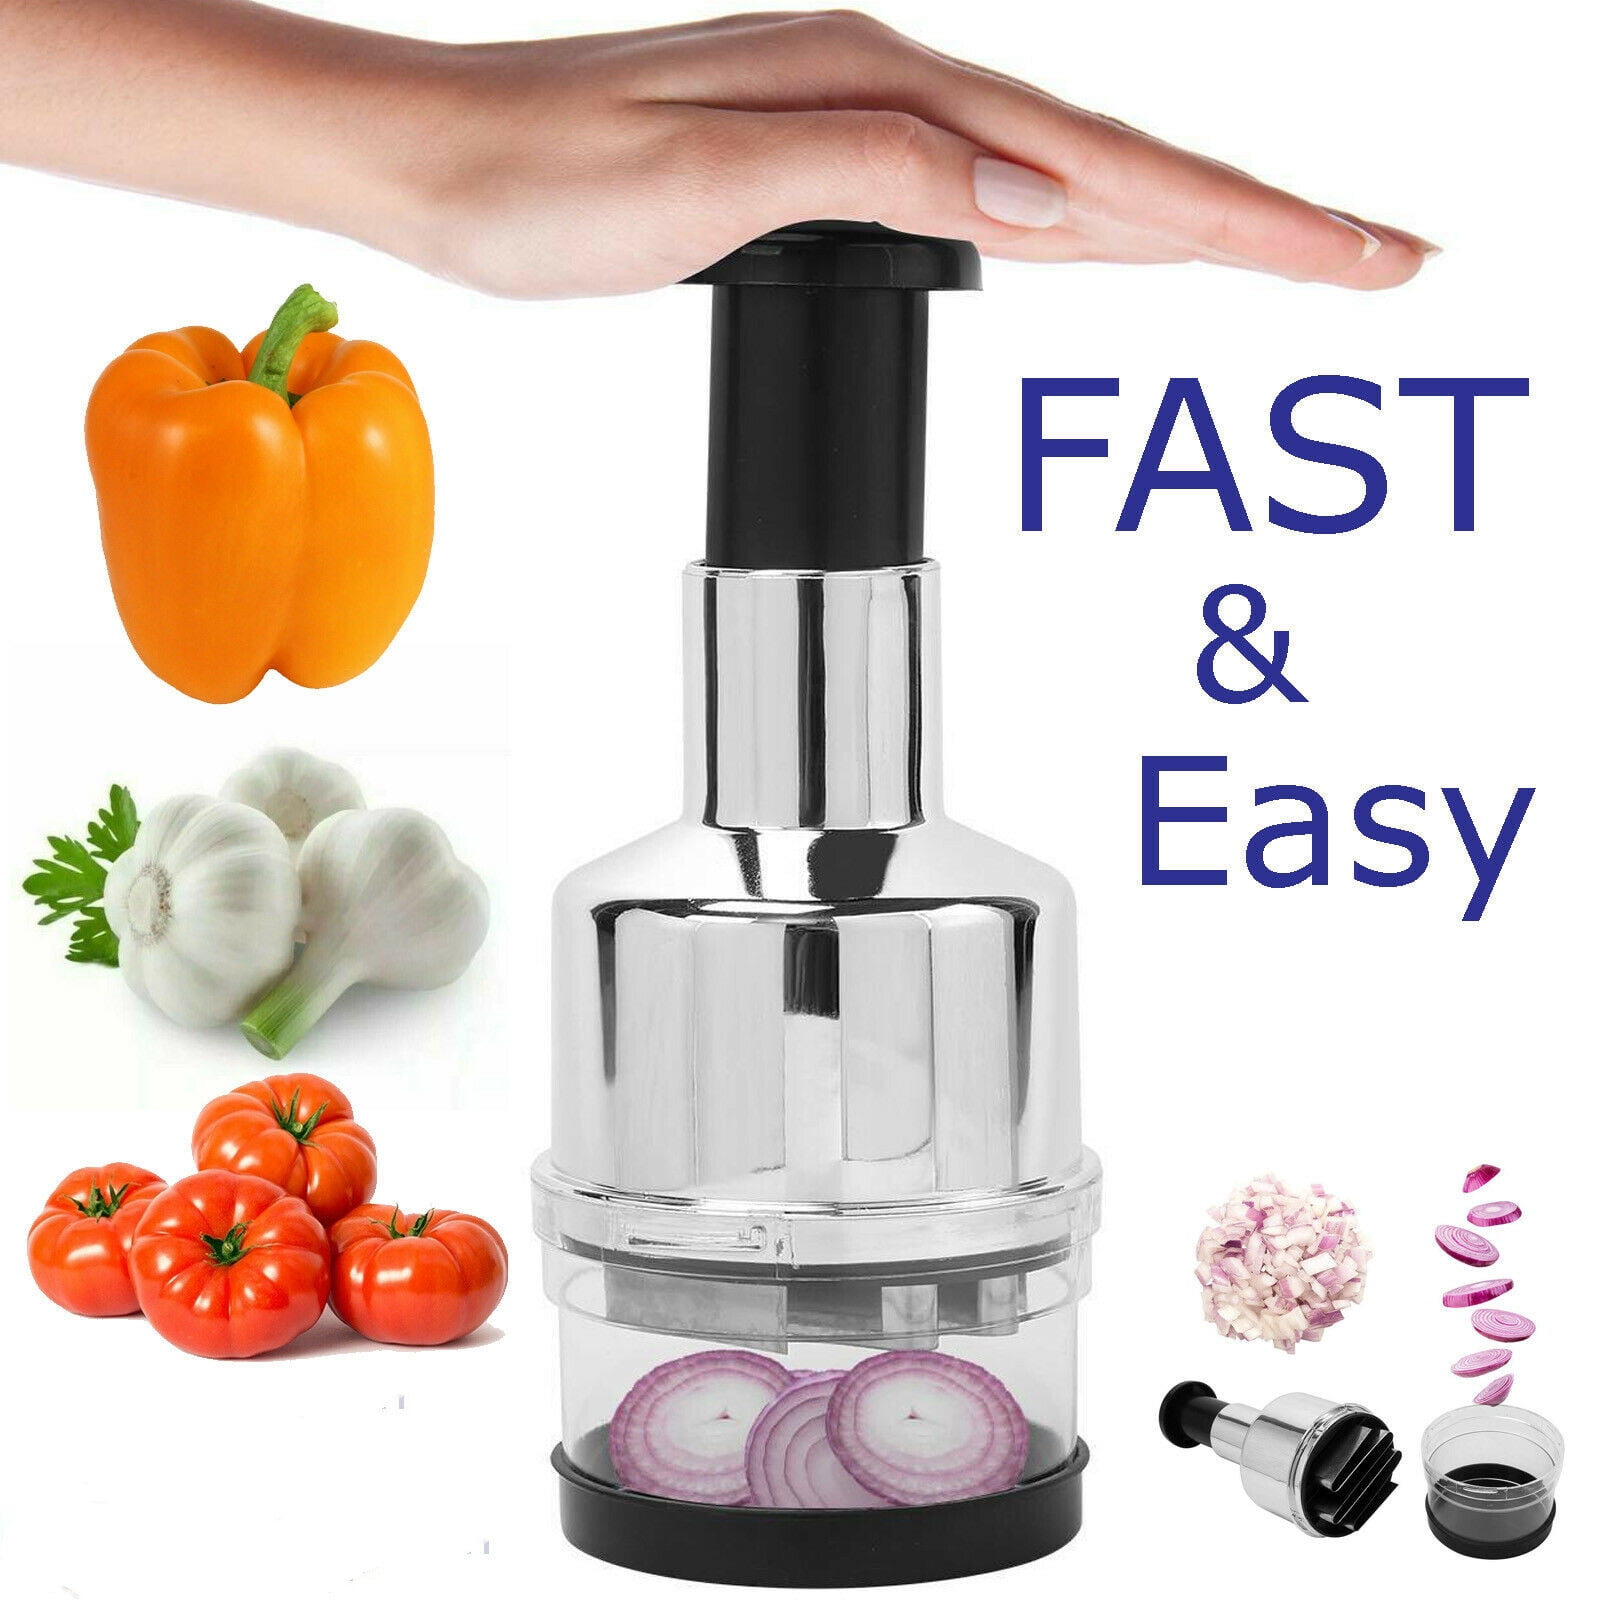 DIYOO Manual Food Processor Vegetable Meat Chopper, Portable Hand Manual Push Garlic Grinder Mincer Onion Cutter for Veggies, Ginger, Fruits, Nuts